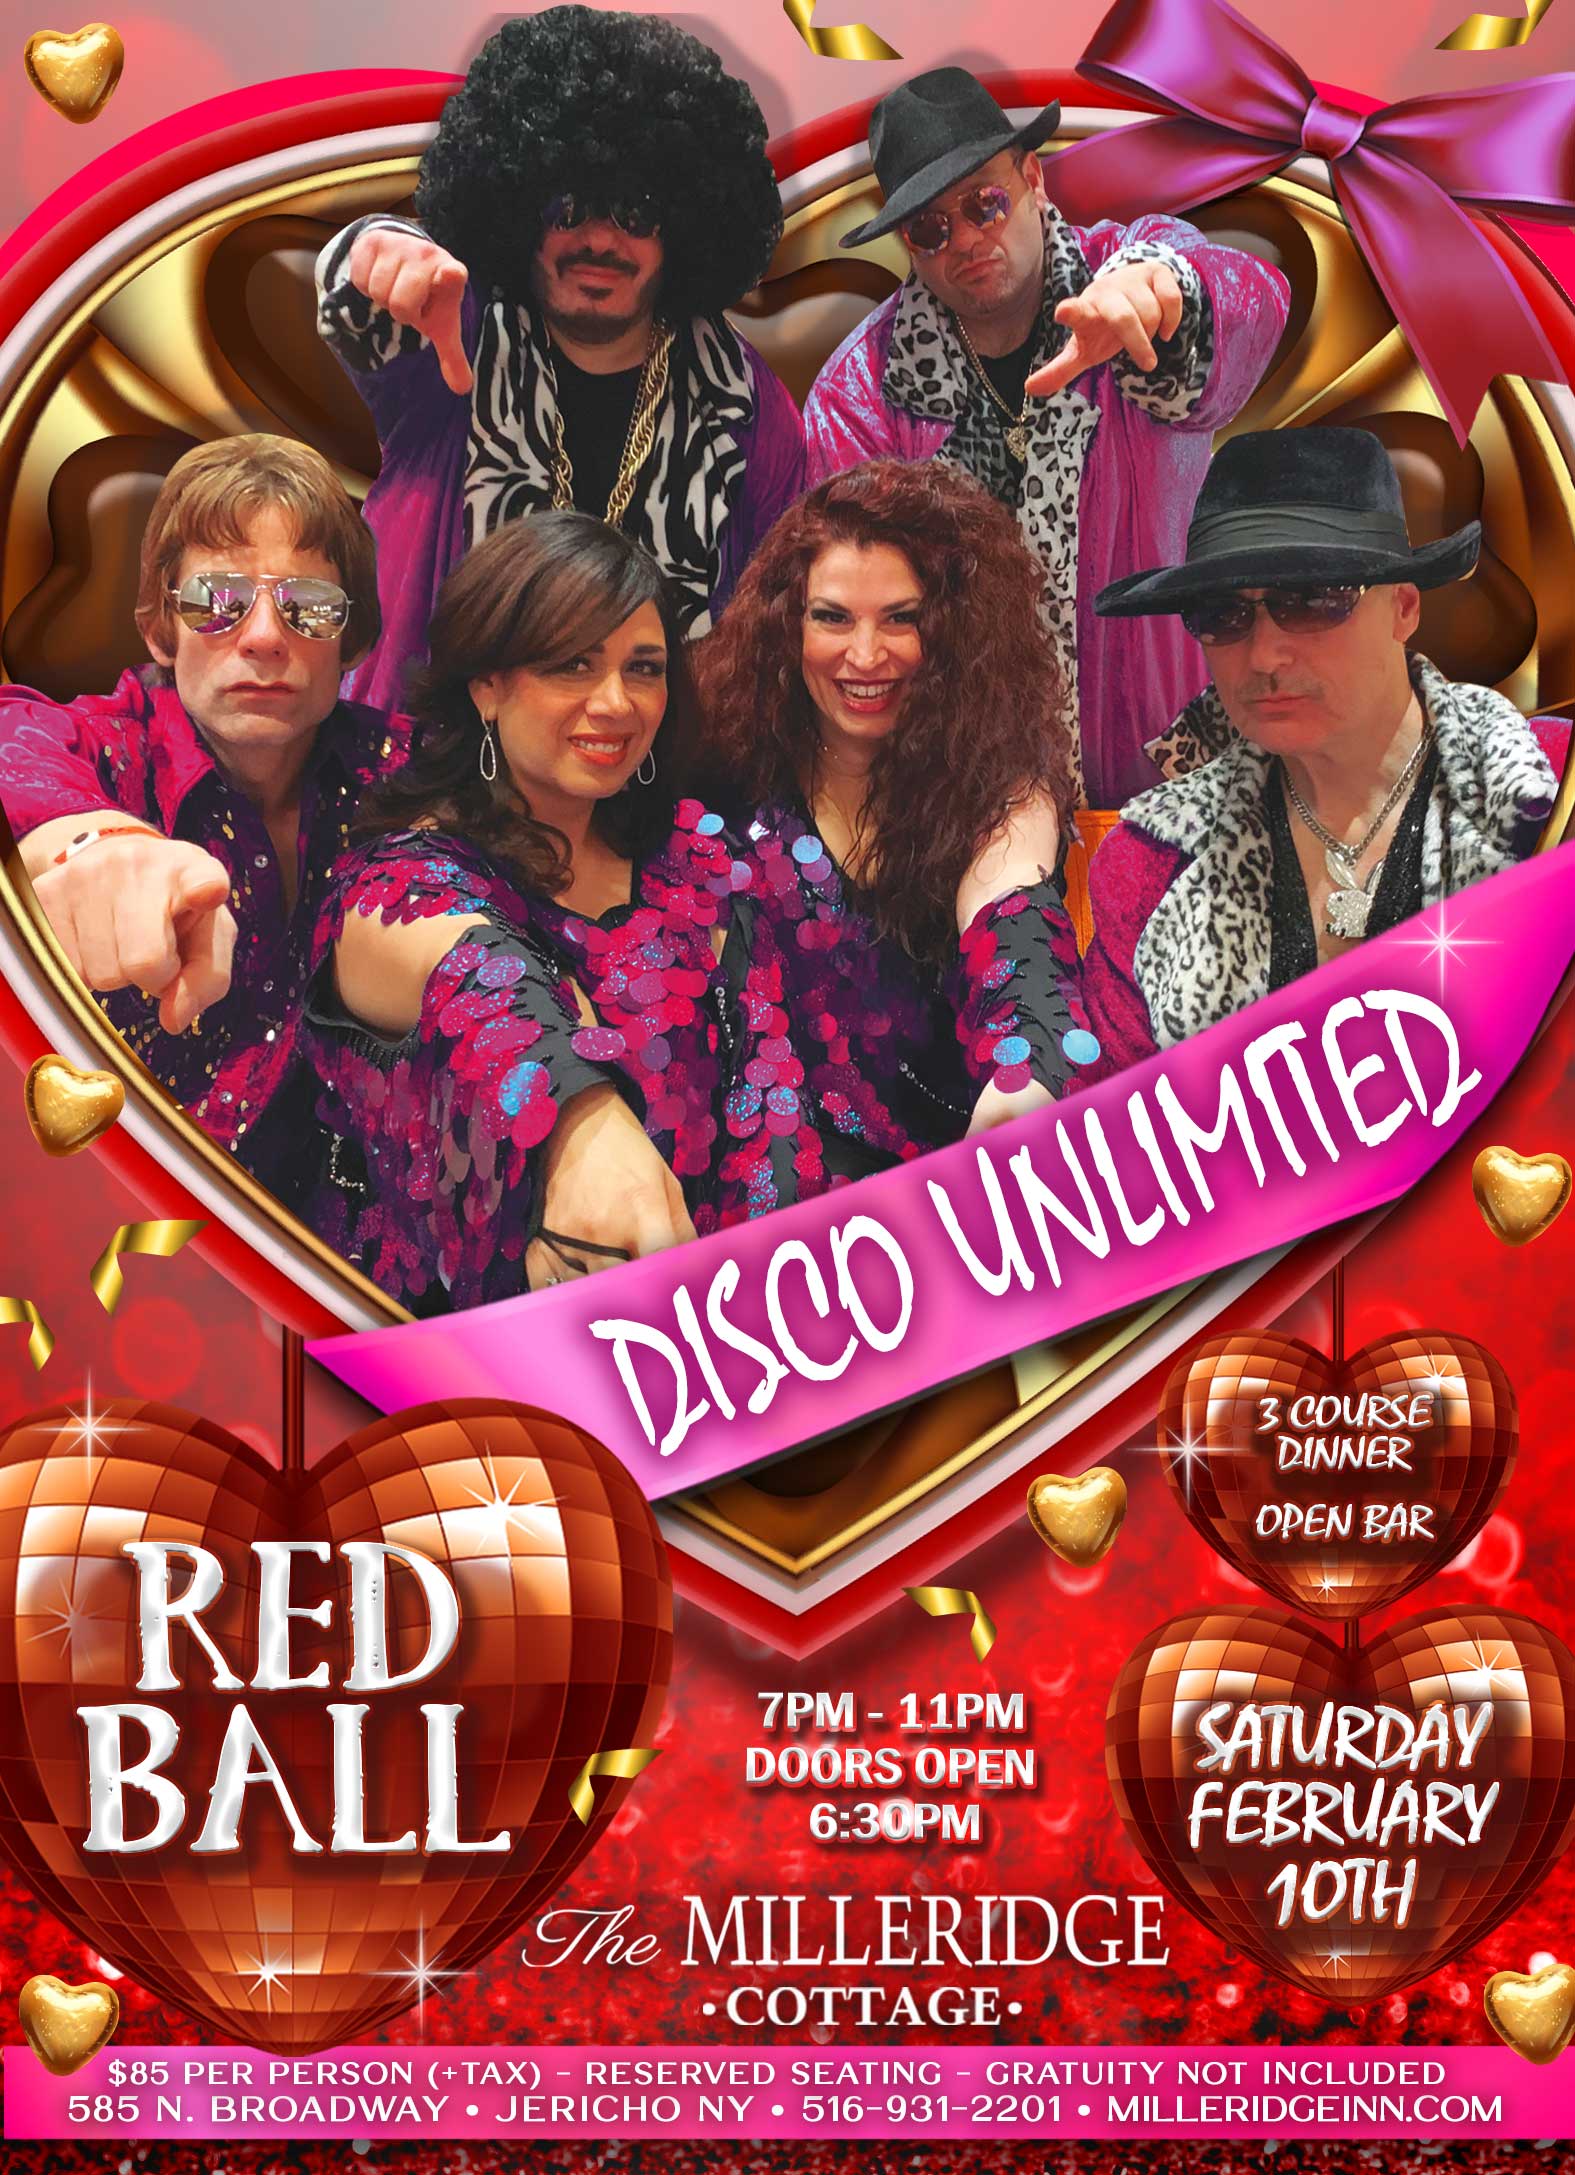 Disco Unlimited at the Milleridge